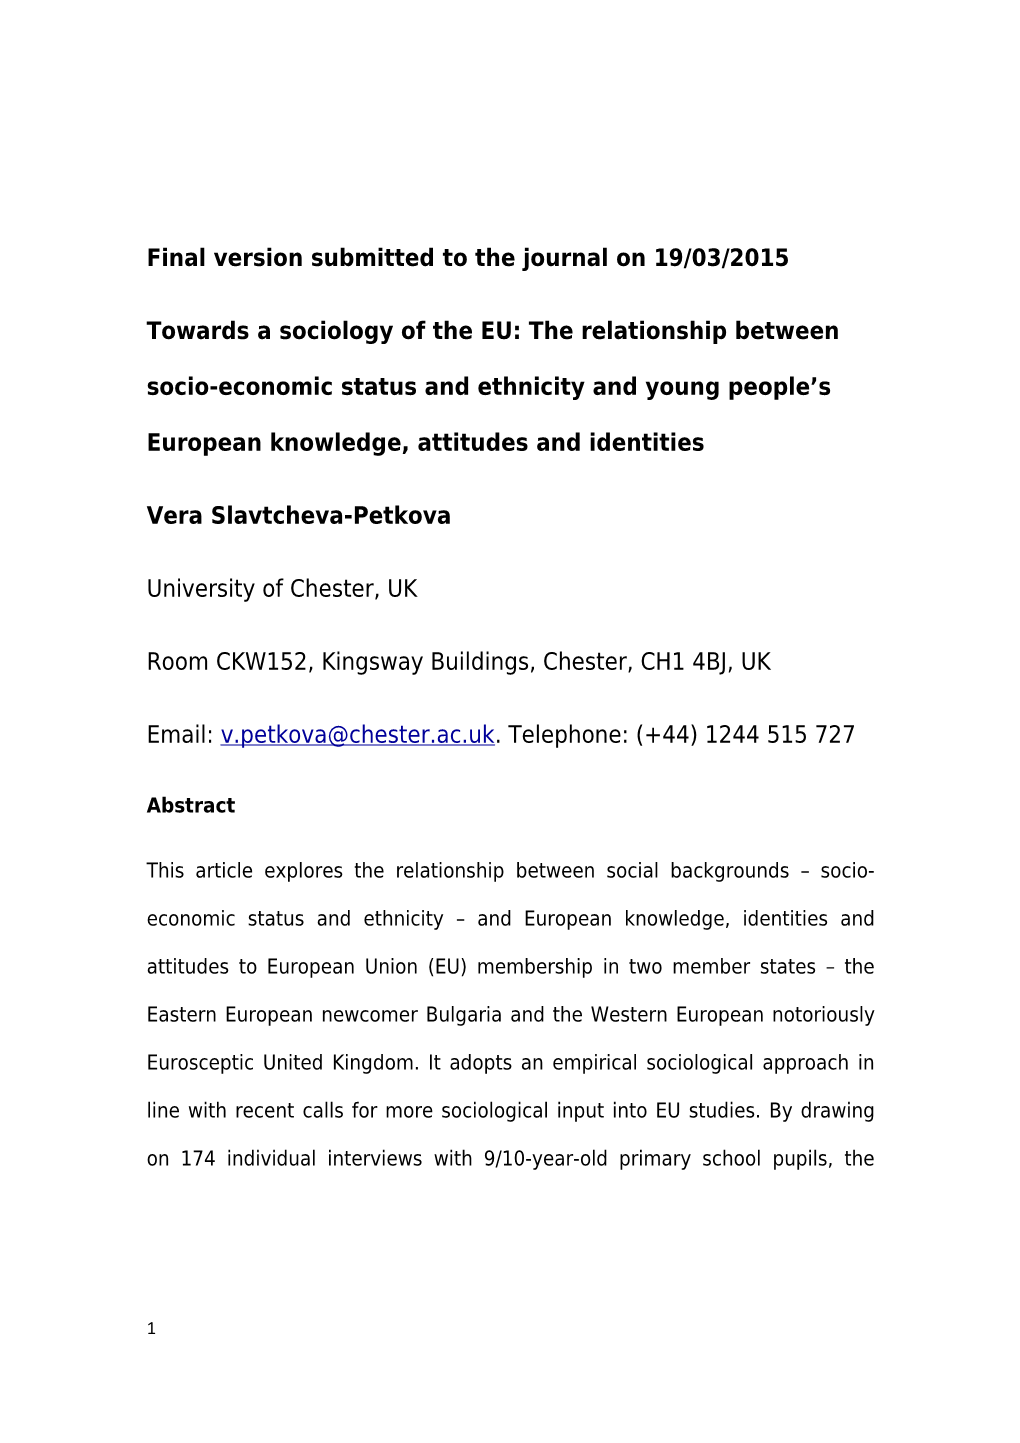 Final Version Submitted to the Journal on 19/03/2015